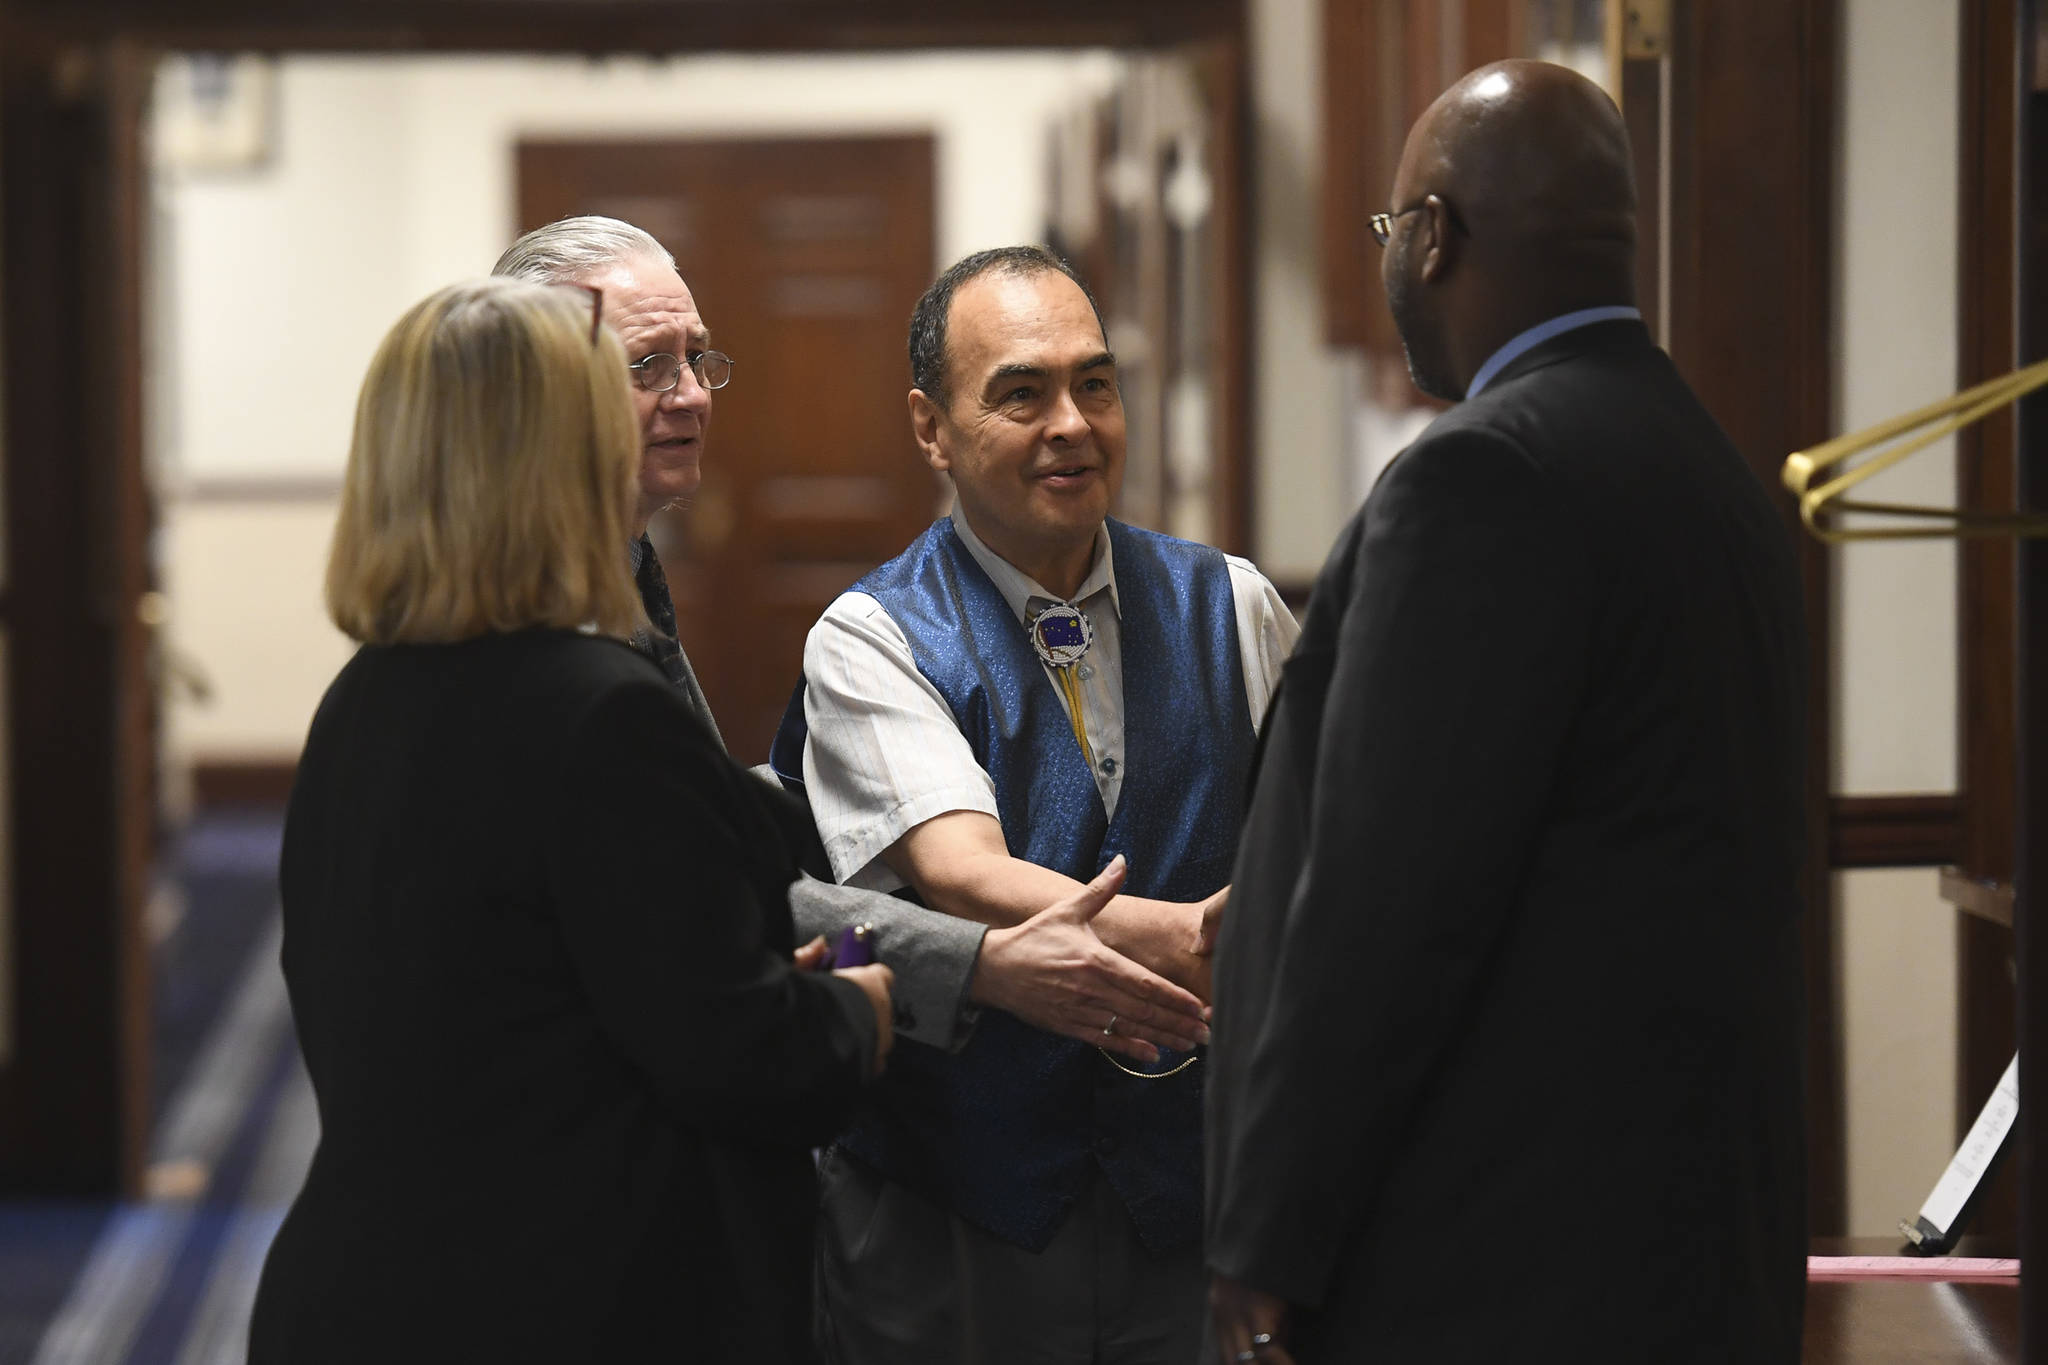 Rep. Tammie Wilson, R-North Pole, left, Sen. Tom Begich, D-Anchorage, and Sen. Donny Olson, D-Golovin, welcome Sen. David Wilson, R-Wasilla, back to the Capitol before a Joint Session of Alaska Legislature at the Capitol on Thursday, July 11, 2019, to debate and vote on an override of Gov. Mike Dunleavy’s budget vetoes. The vote didn’t take place because not enough legislators attended. (Michael Penn | Juneau Empire)